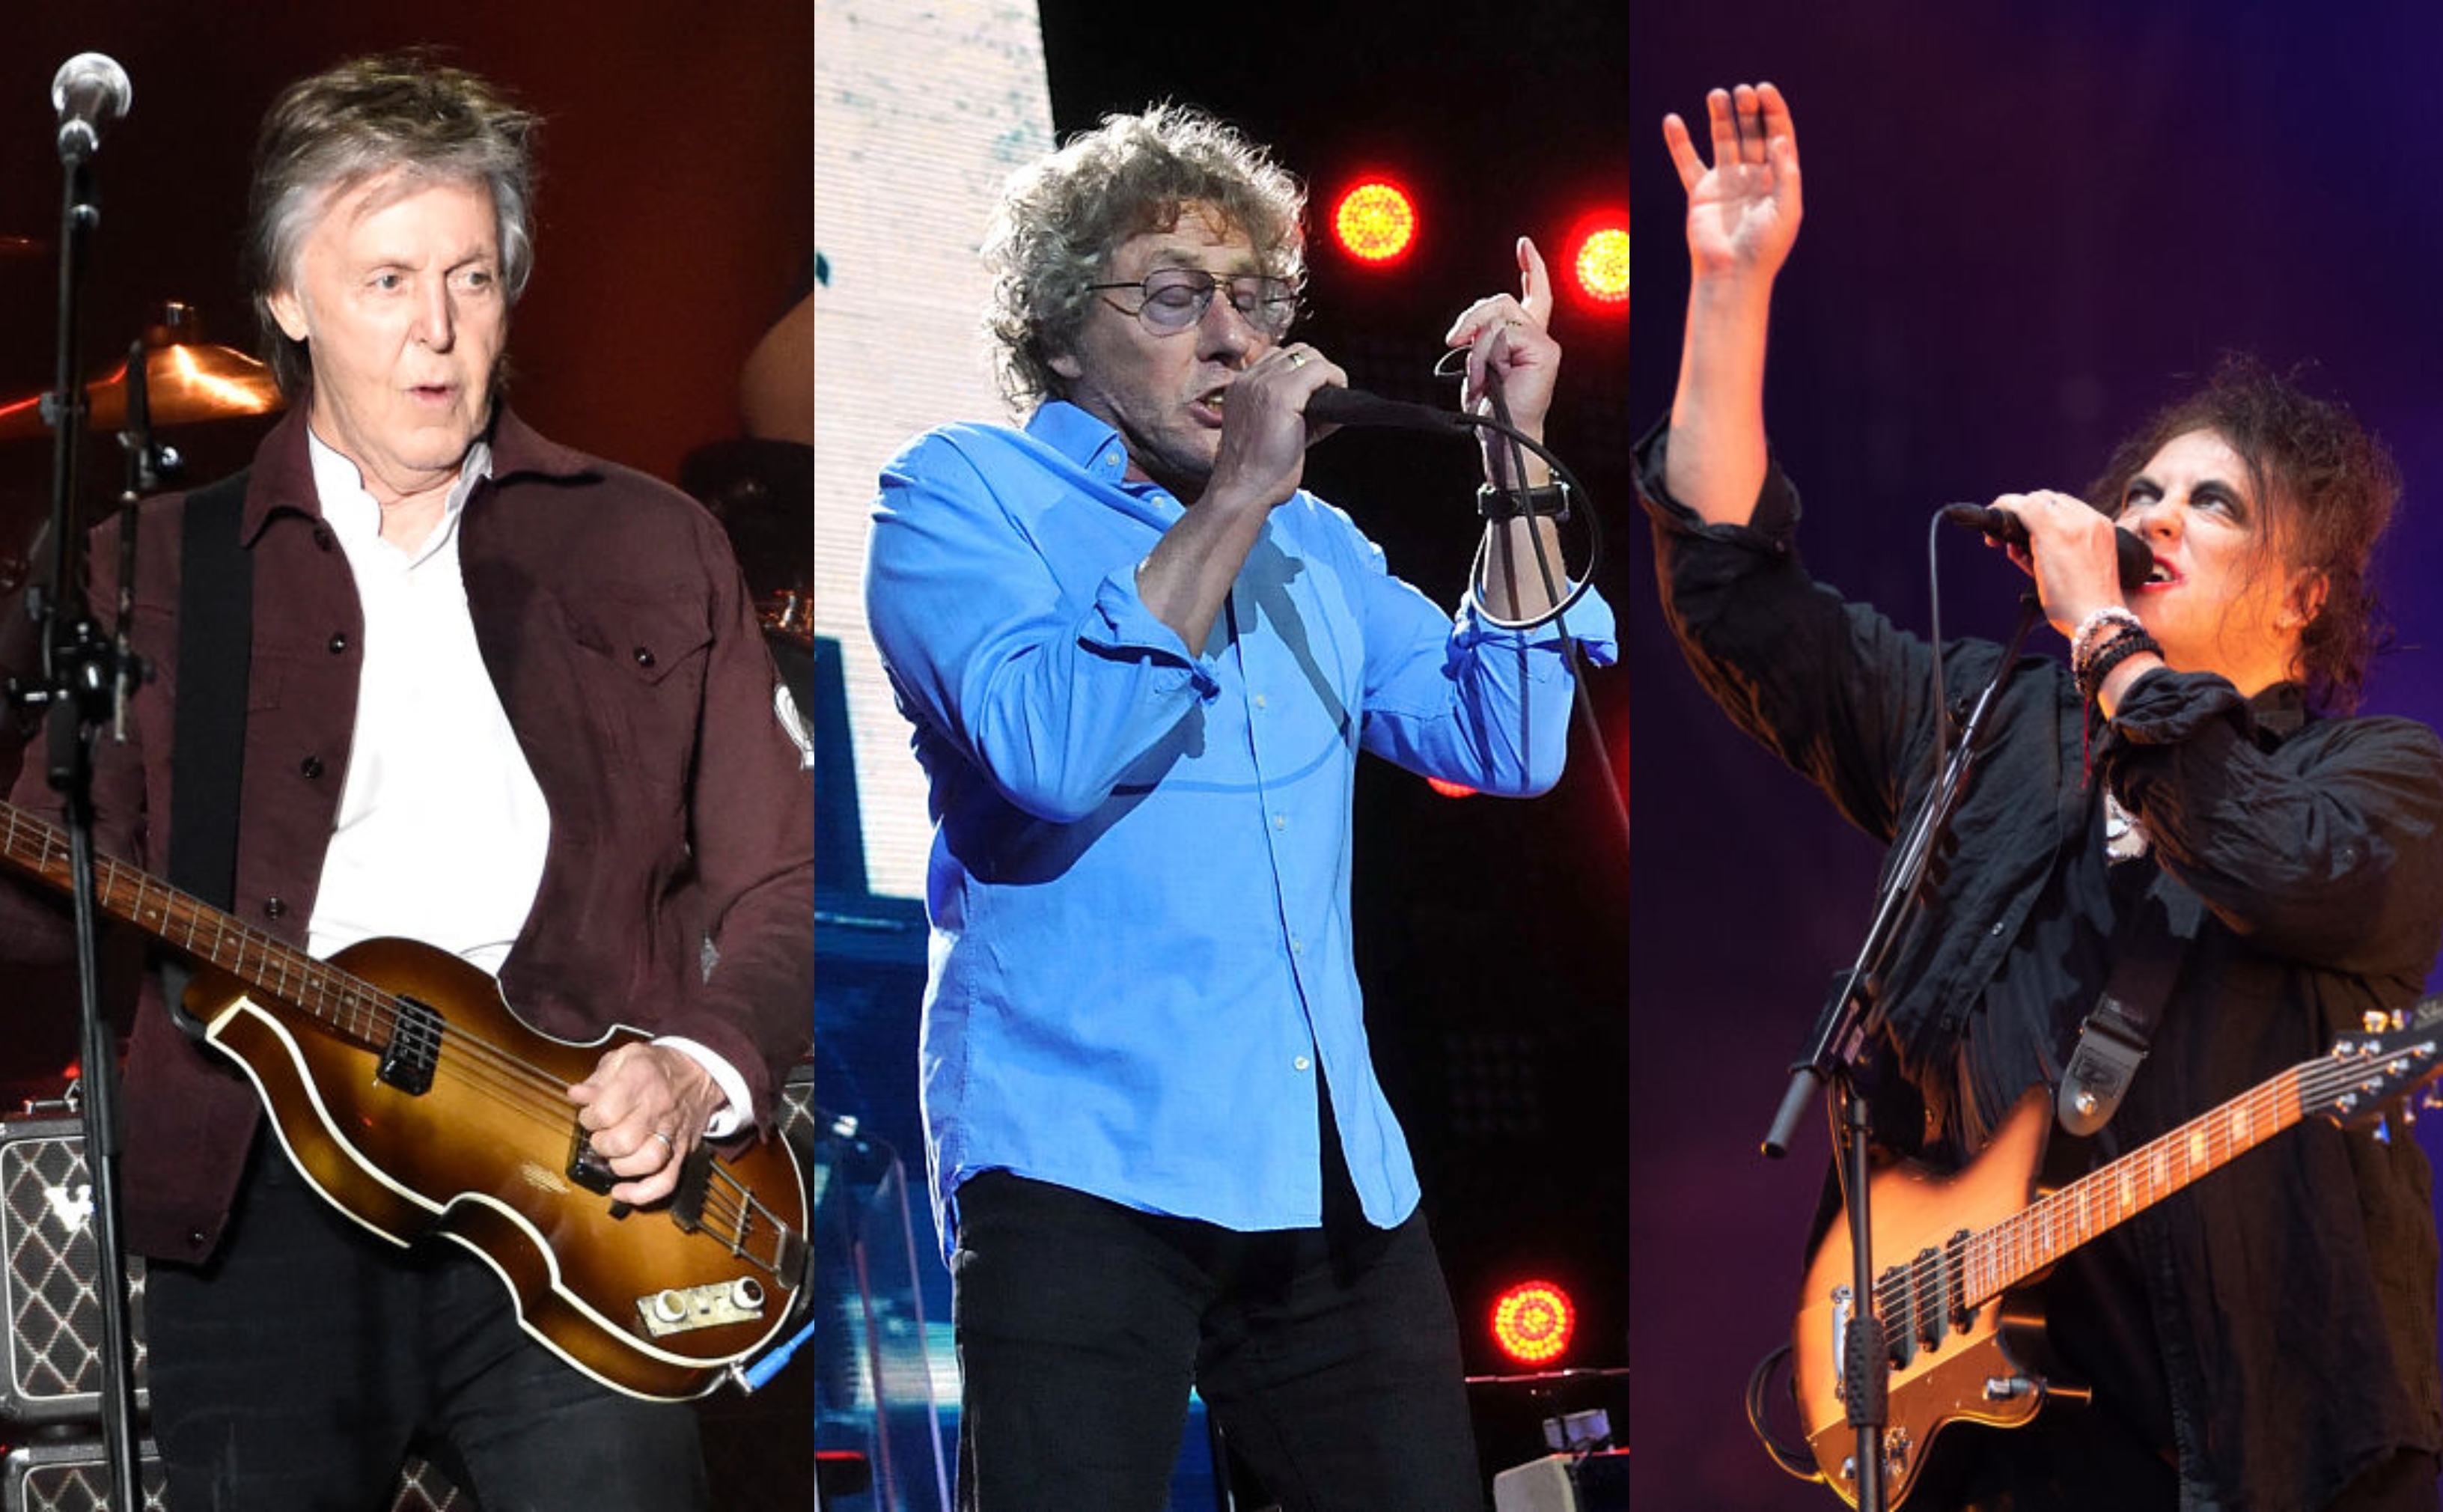 Watch Eddie Vedder Sing With The Who In London